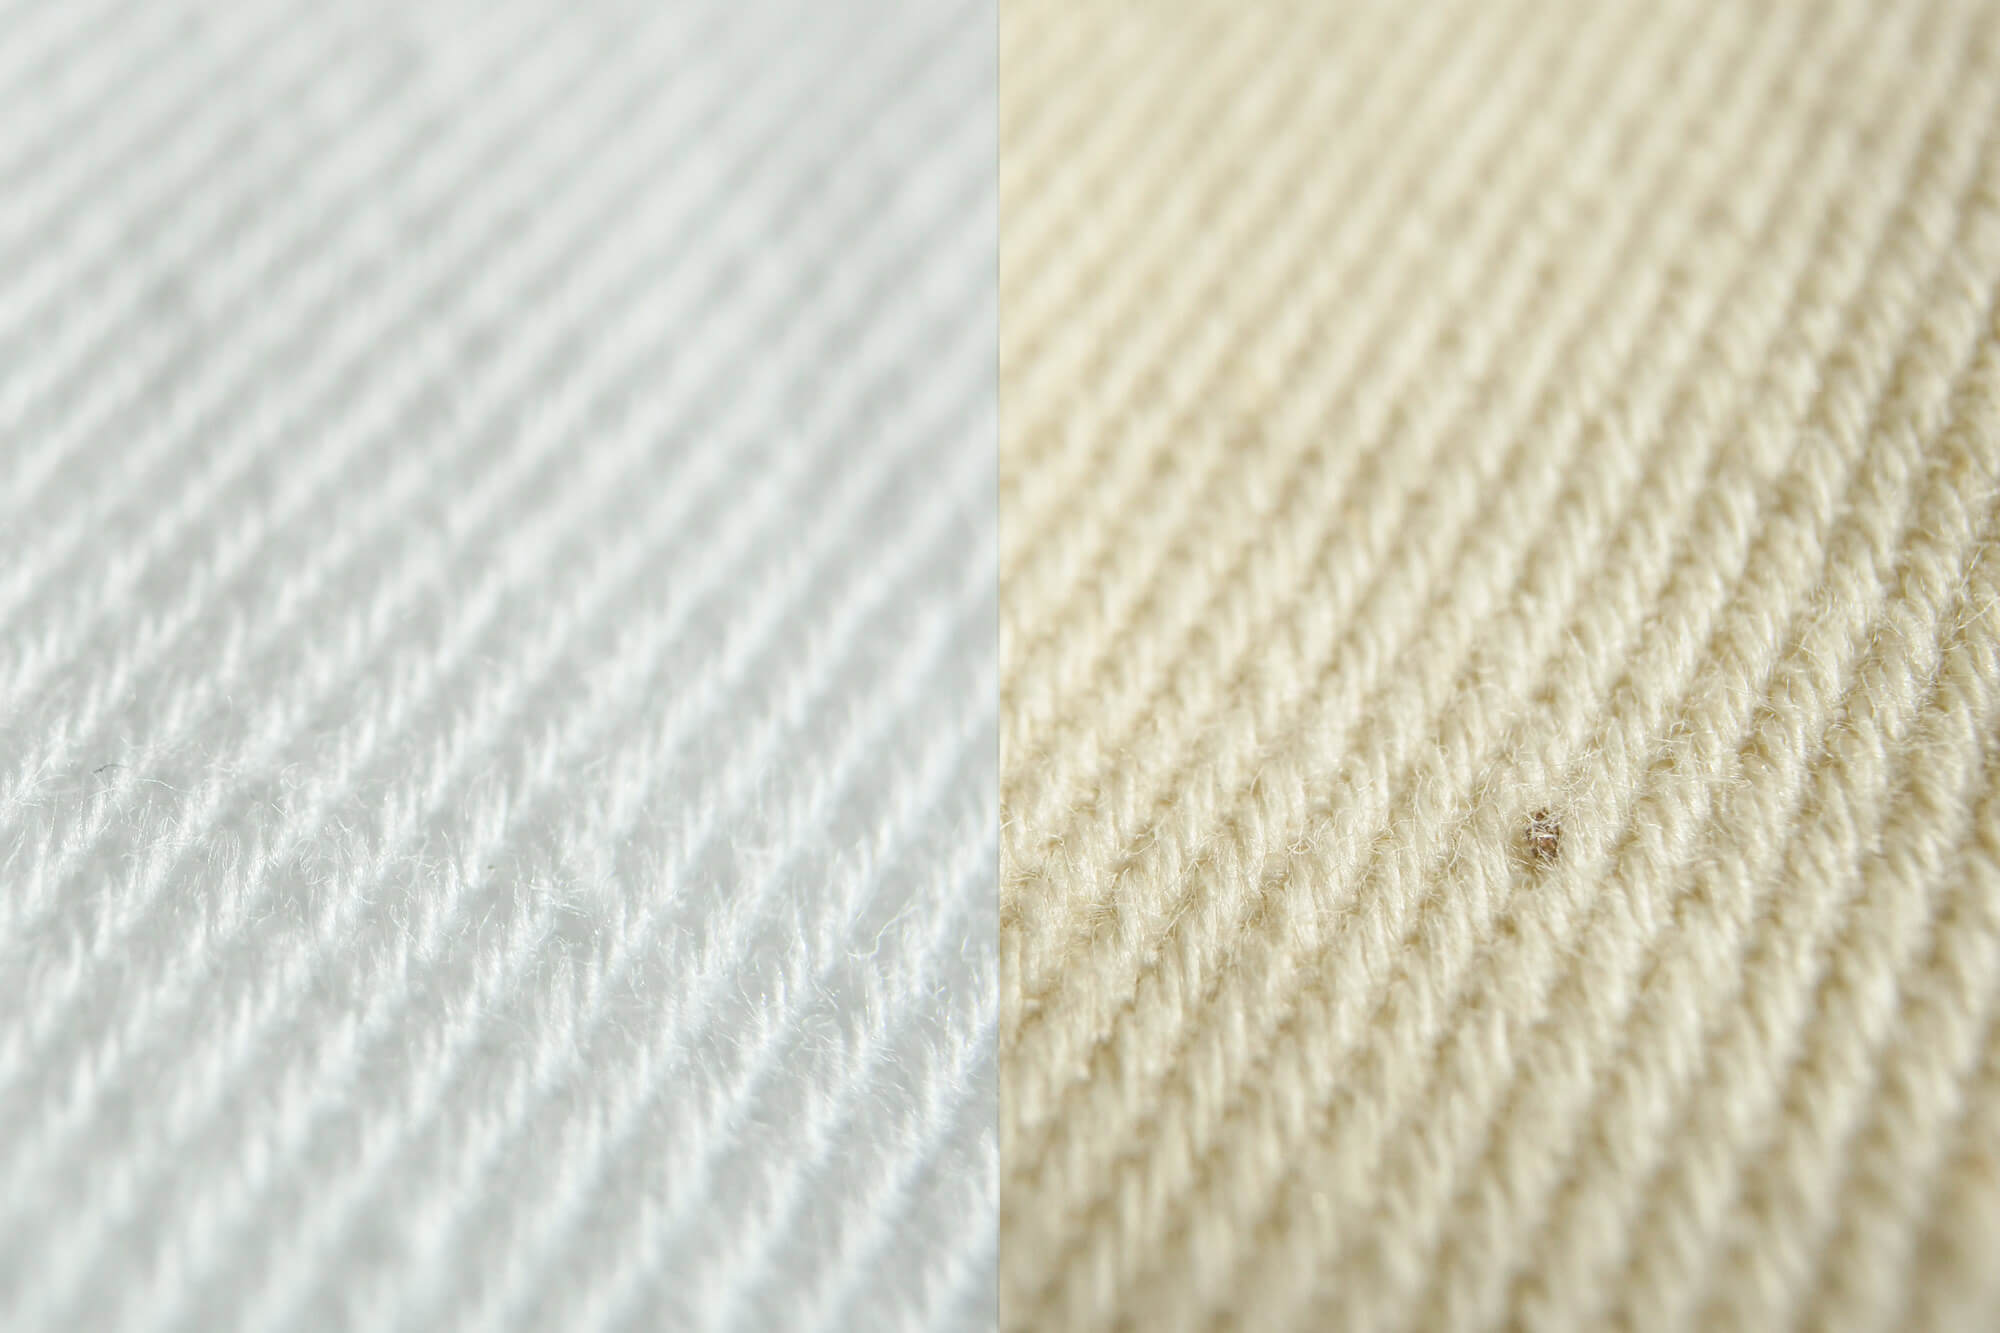 Bleached and unbleached fabric Comparaison